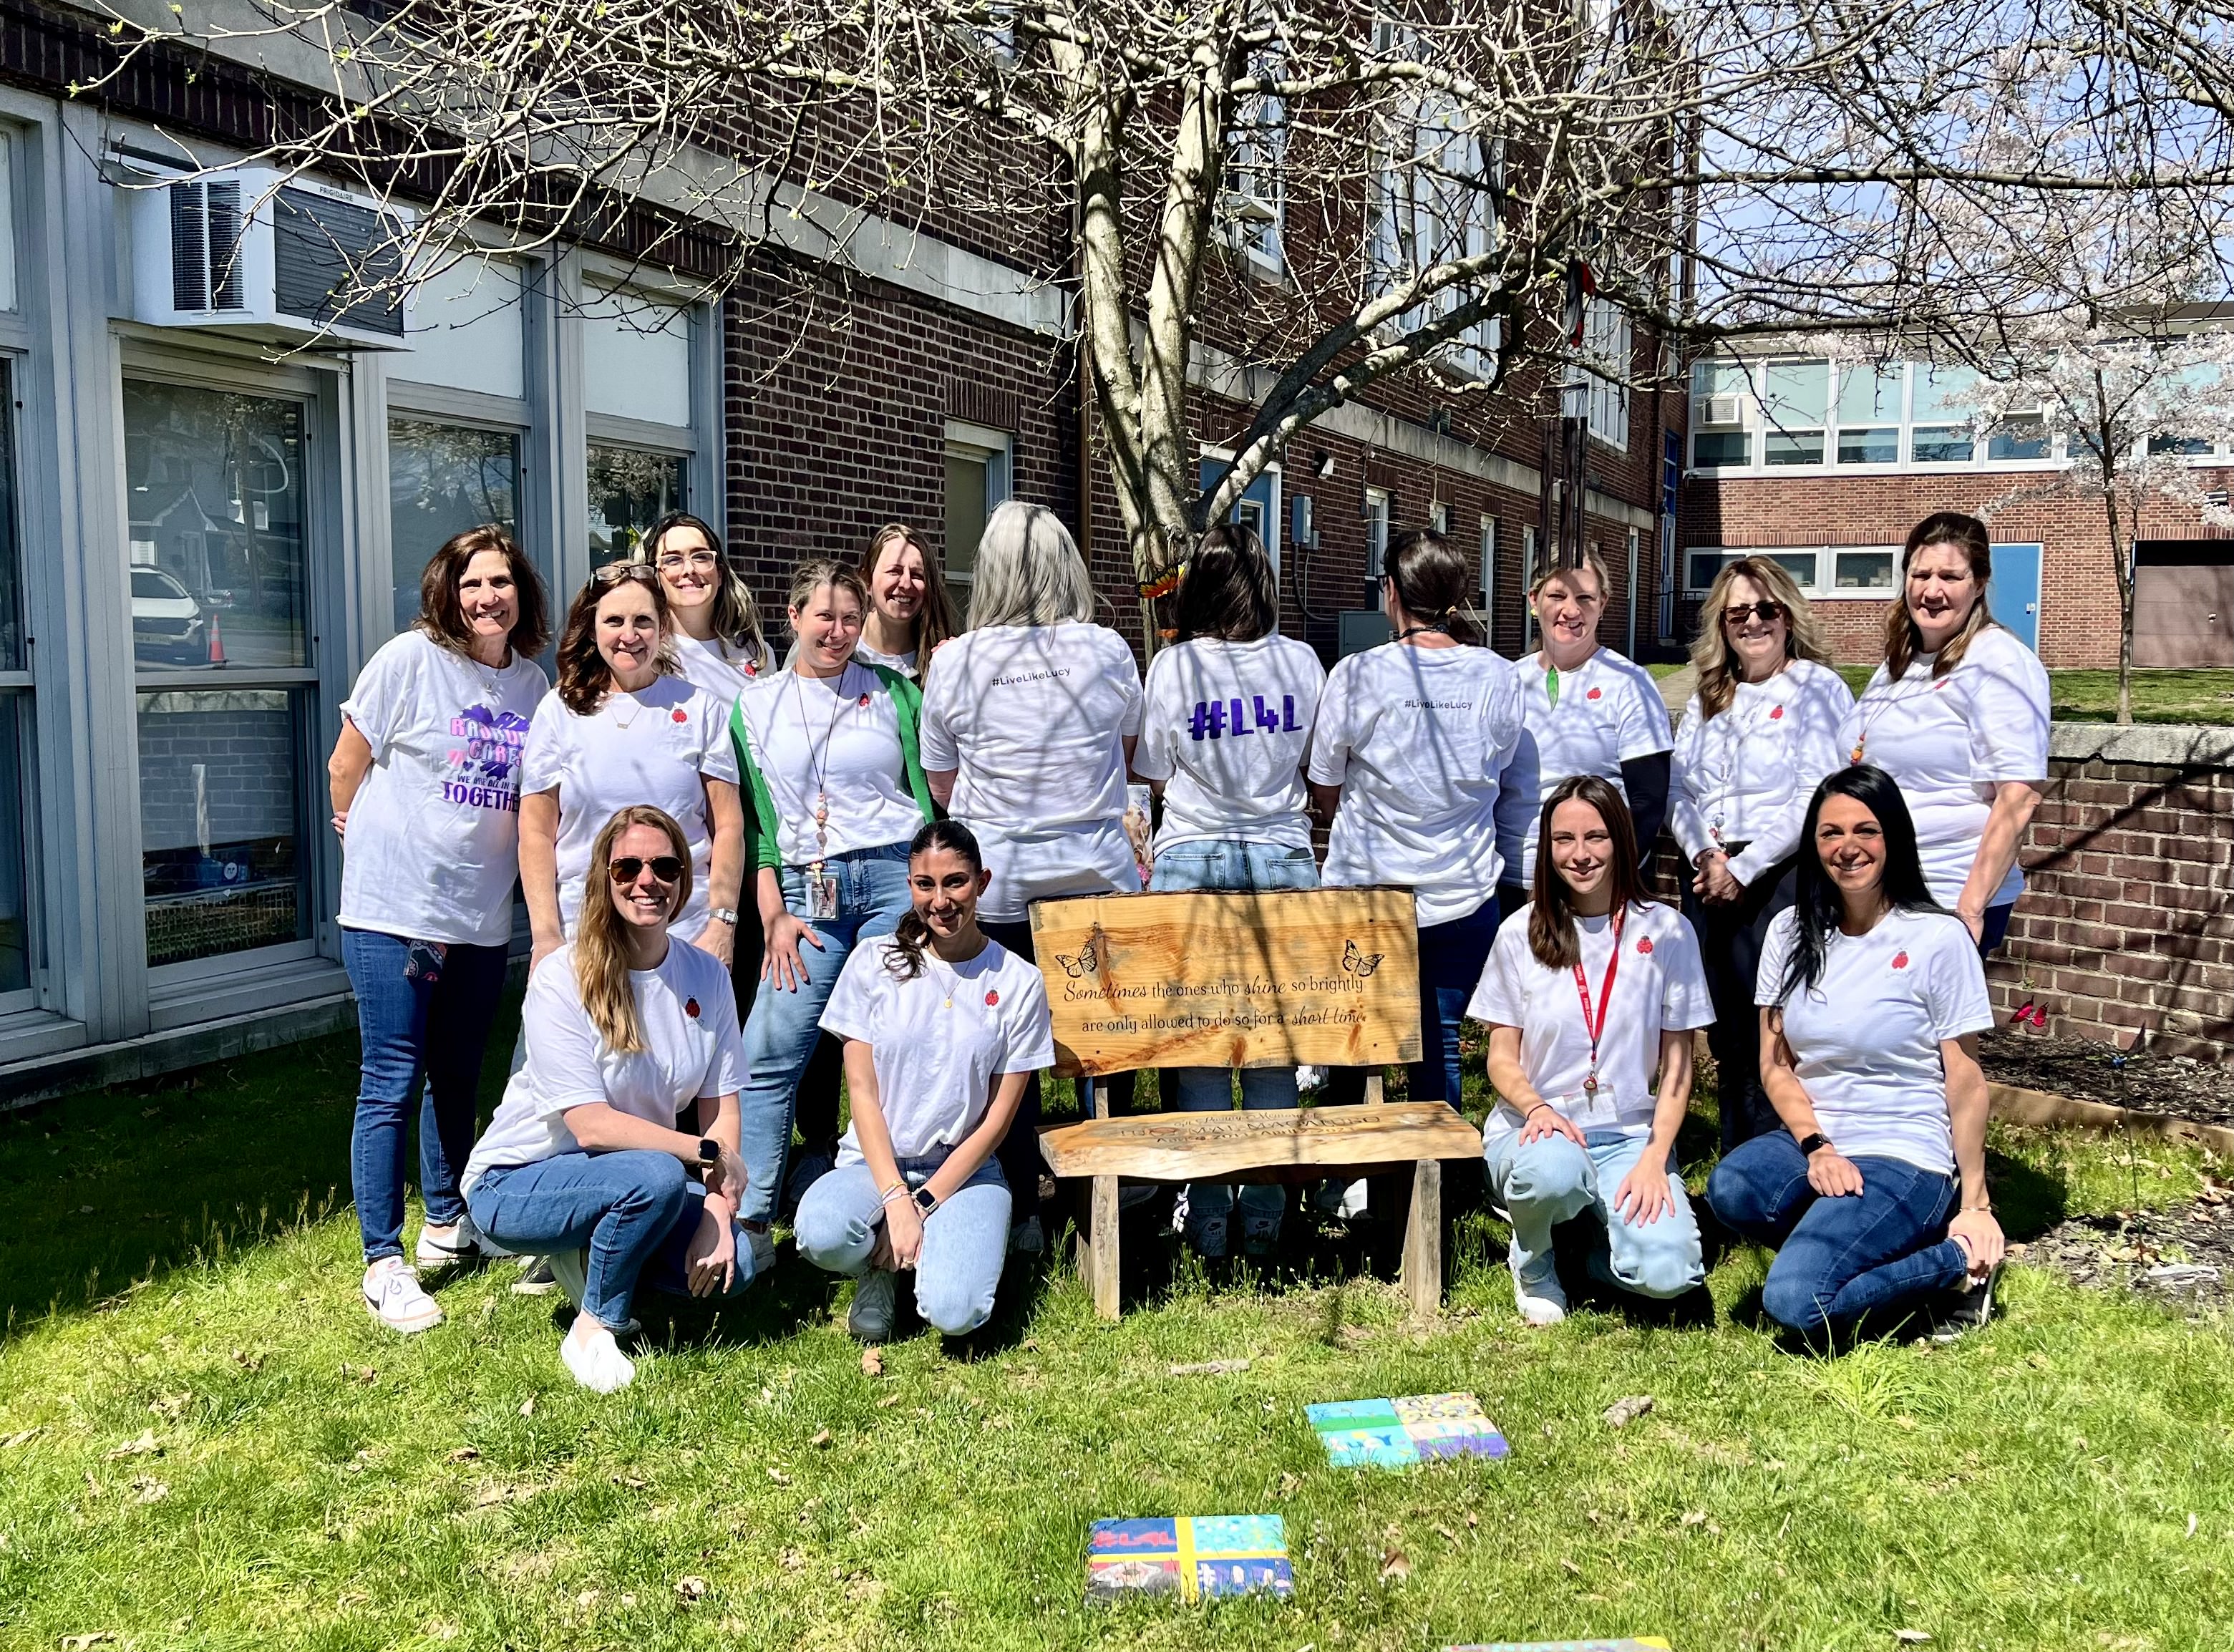 Staff standing in butterfly garden posing with white "Lucy" shirts